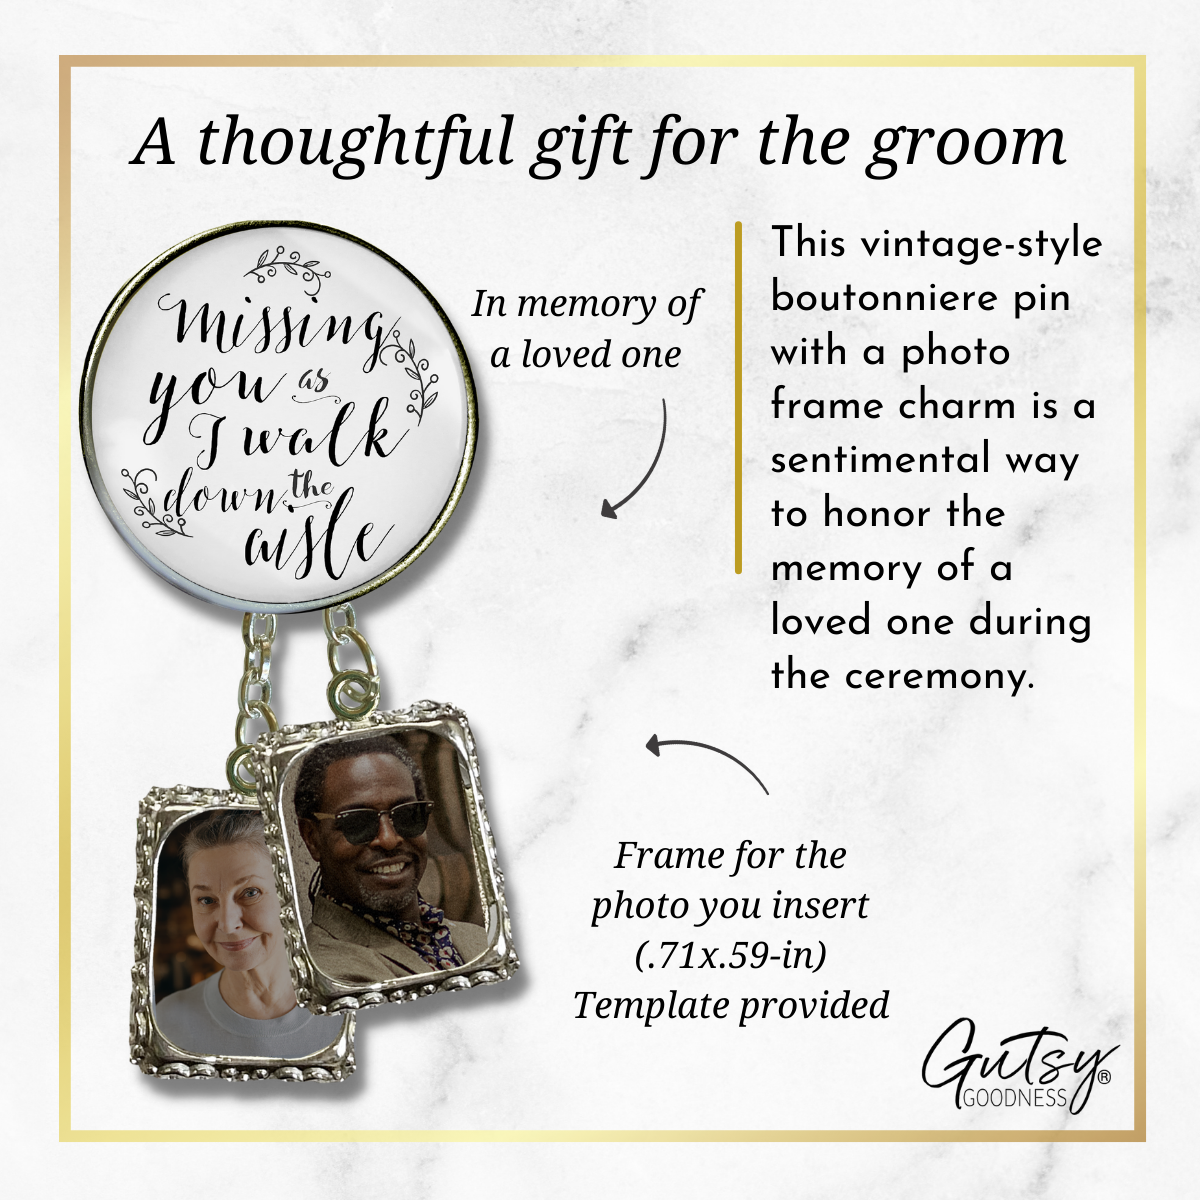 Wedding Memorial Boutonniere Pin Photo Frame Missing You Today Silver White 2 Frames - Gutsy Goodness